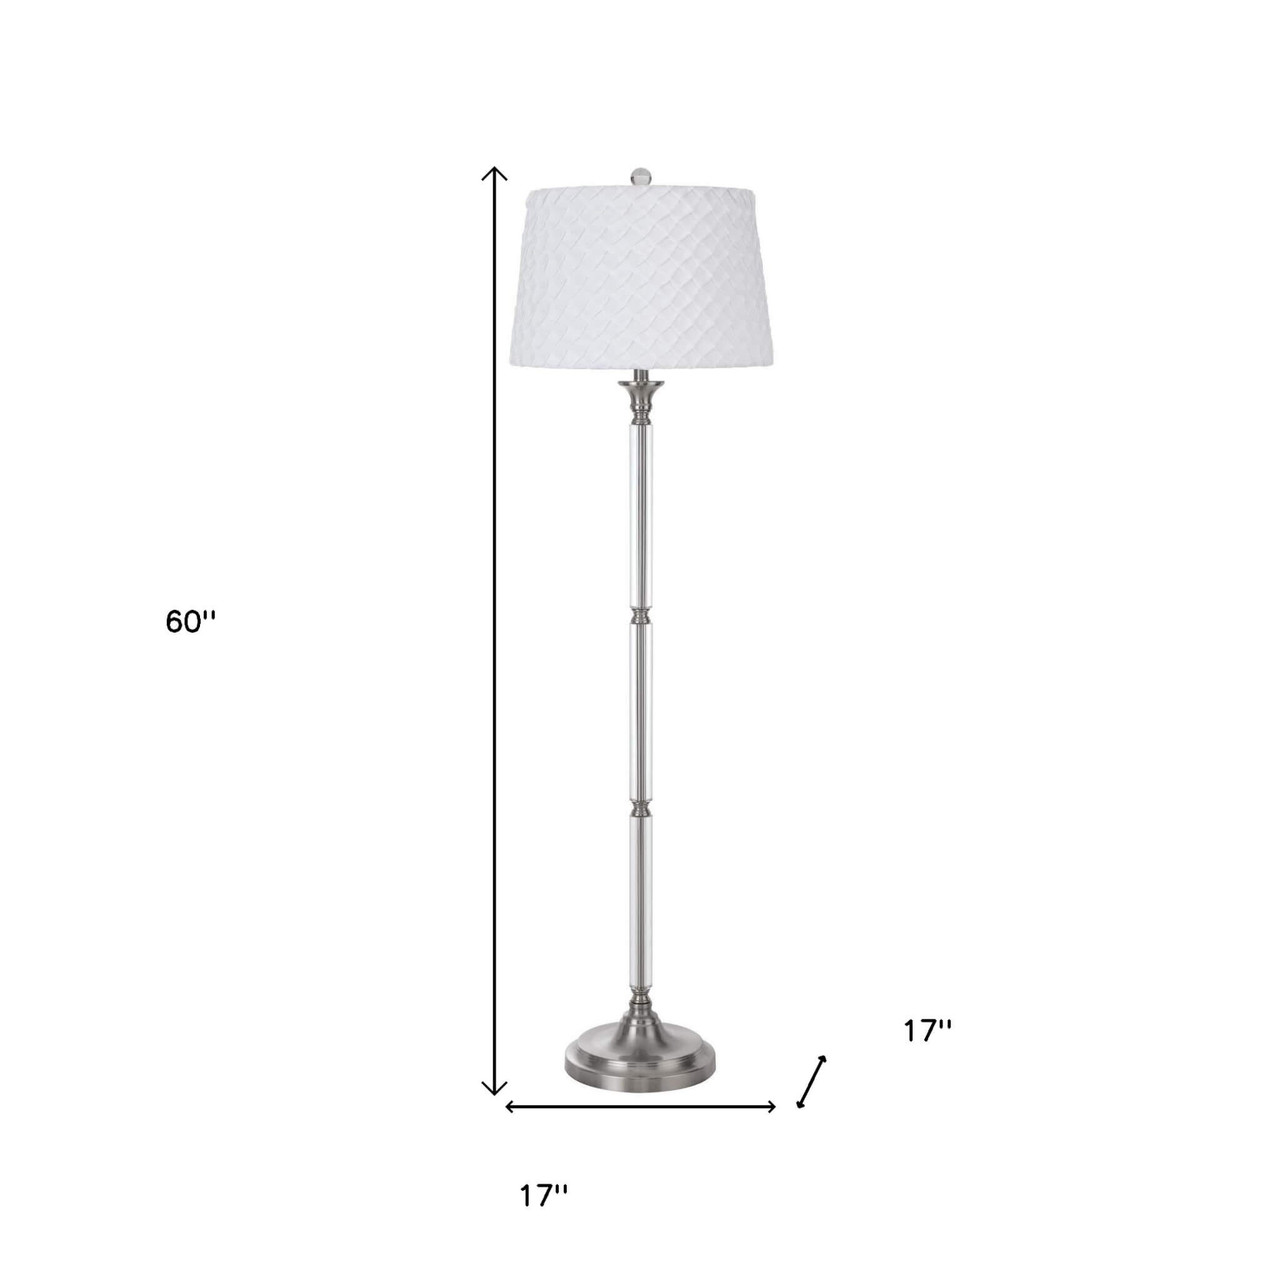 60" Nickel Traditional Shaped Floor Lamp With White Square Shade - Chicken Pieces